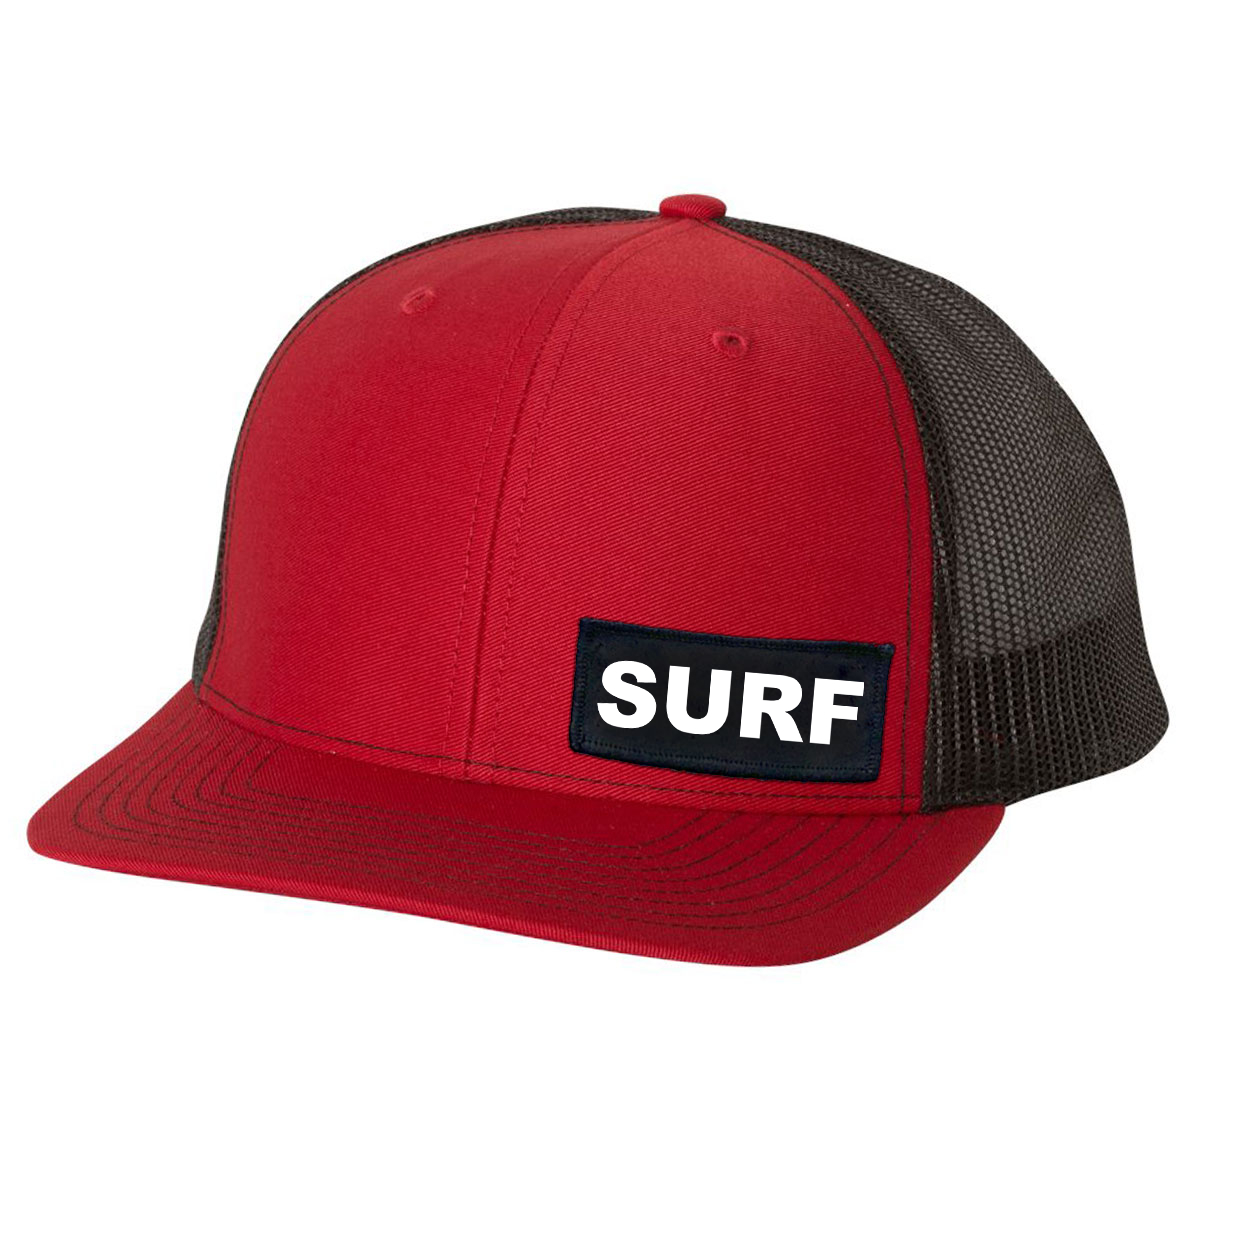 Surf Brand Logo Night Out Woven Patch Snapback Trucker Hat Red/Black